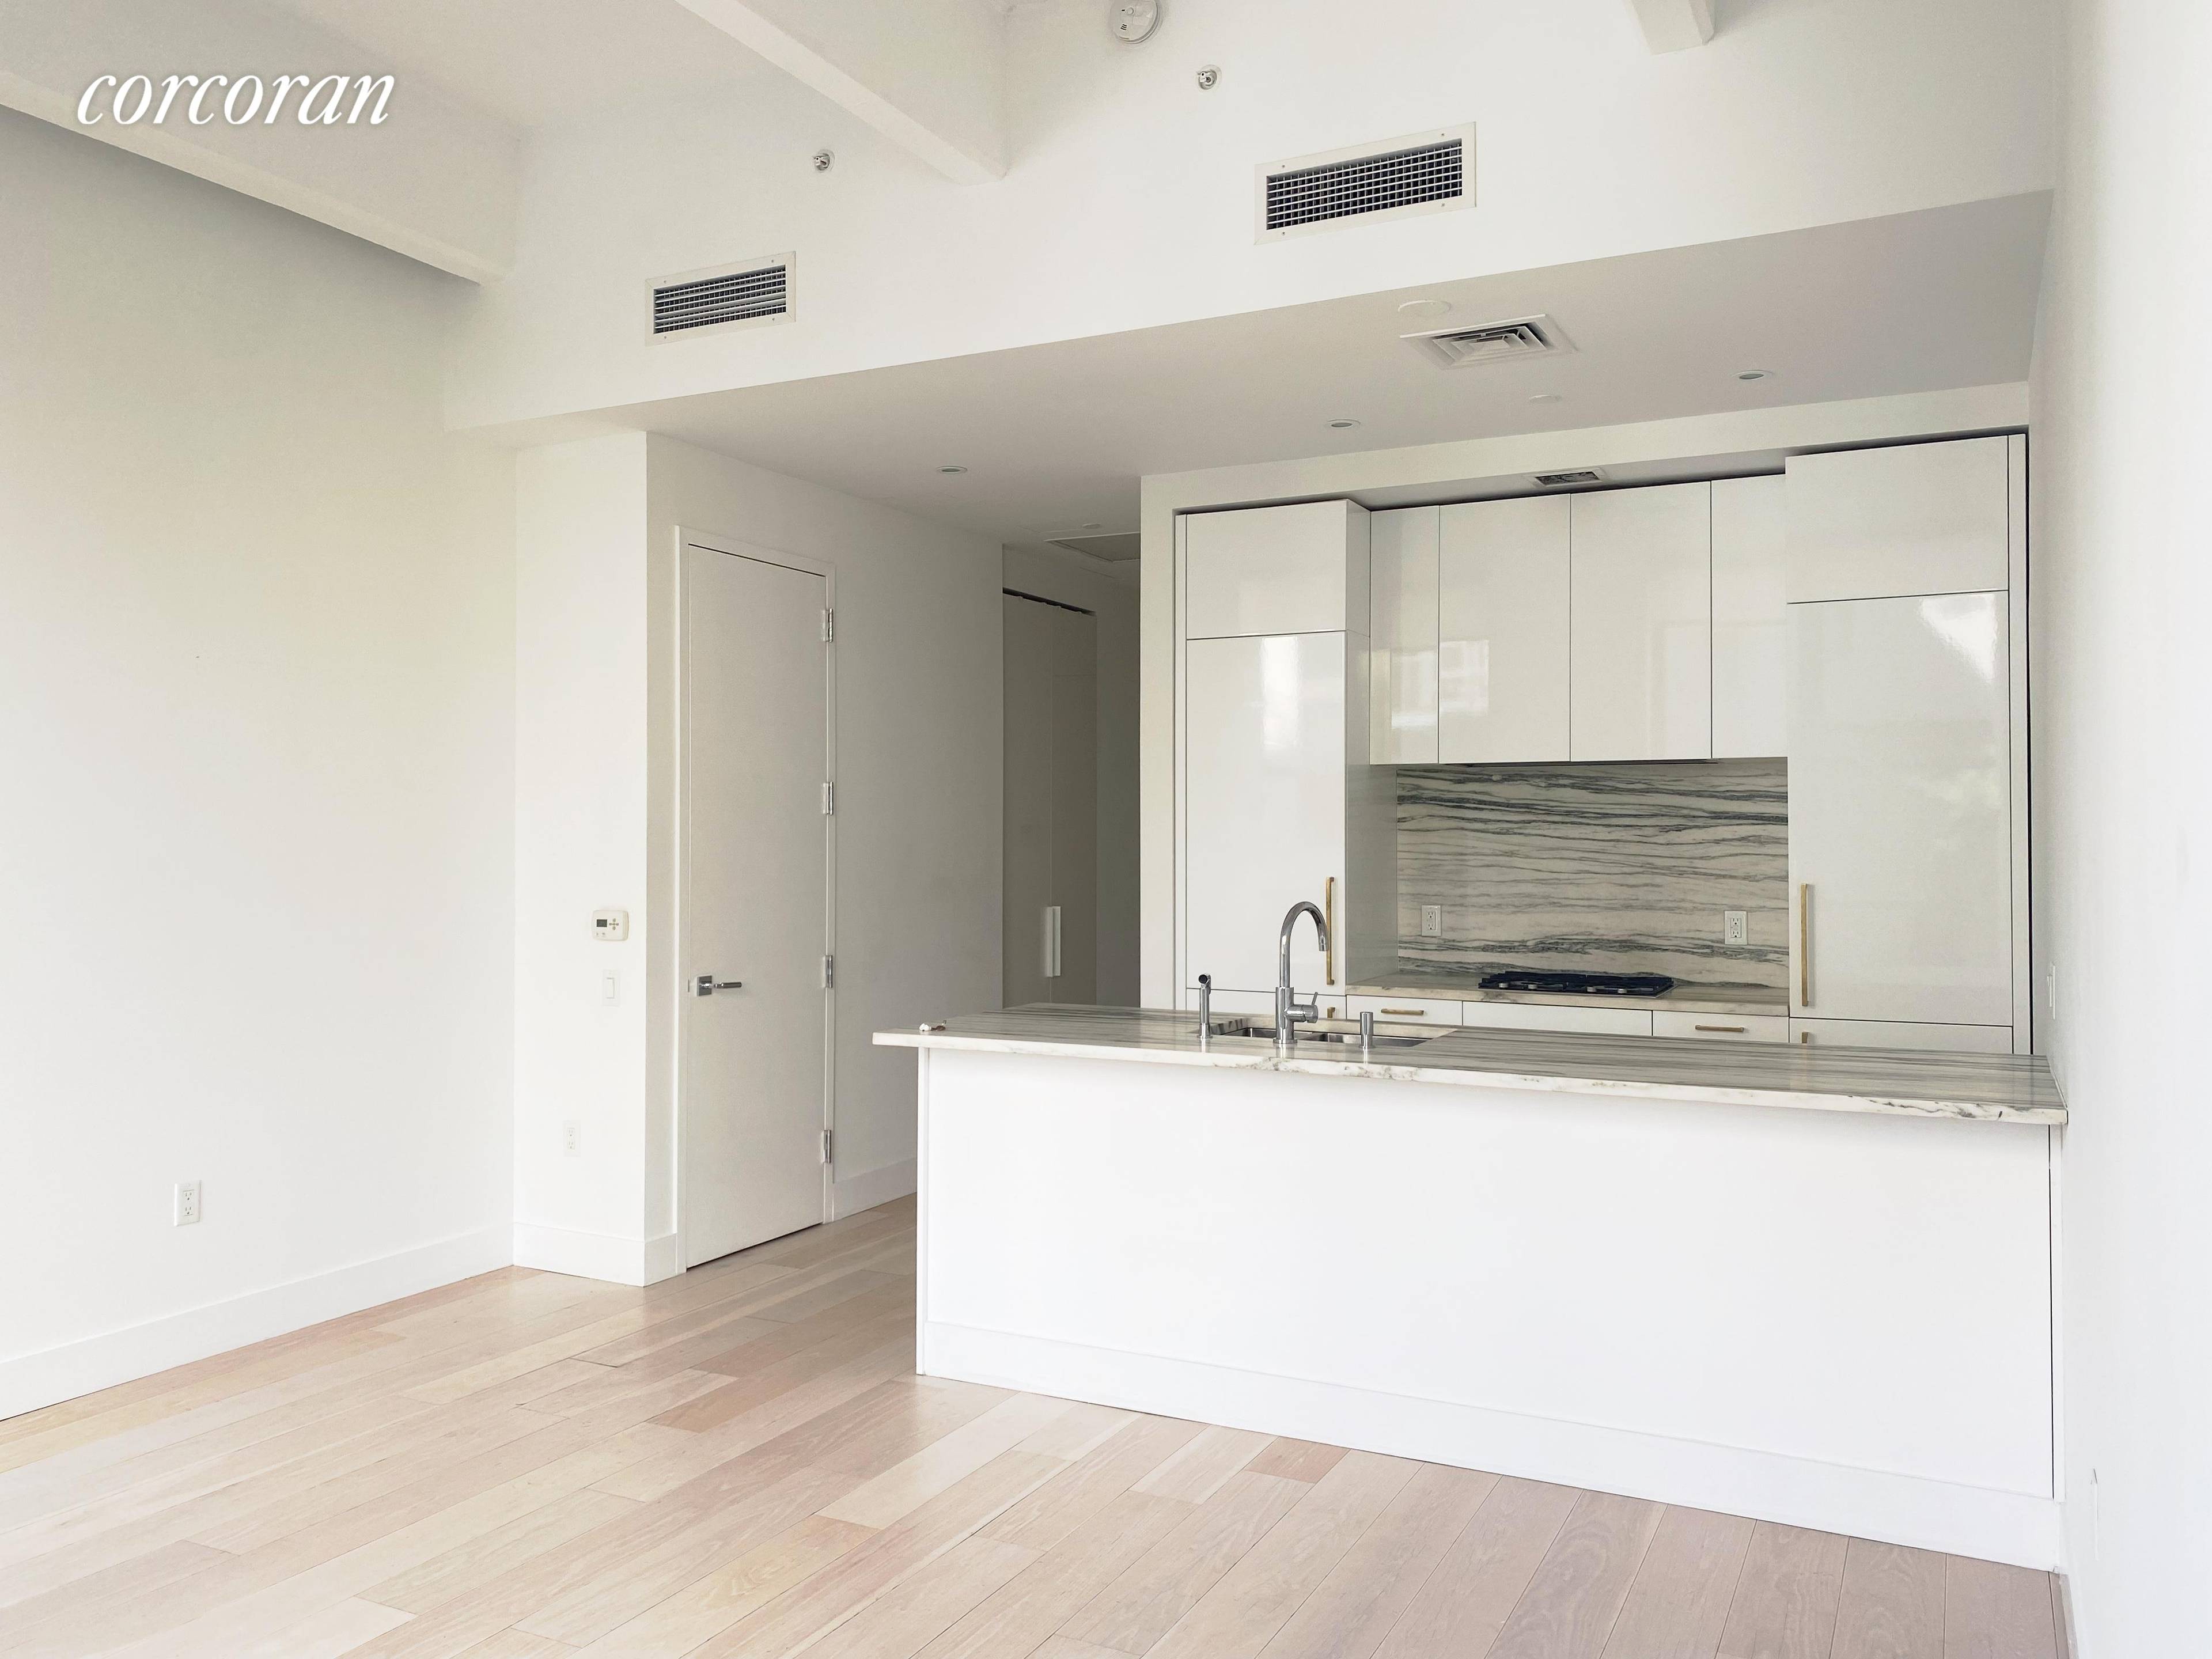 Welcome to 3F This stunning loft studio located in prime Williamsburg features sprawling high ceilings, white oak floors, Italian built ins, generous storage space, and oversized windows that flood the ...